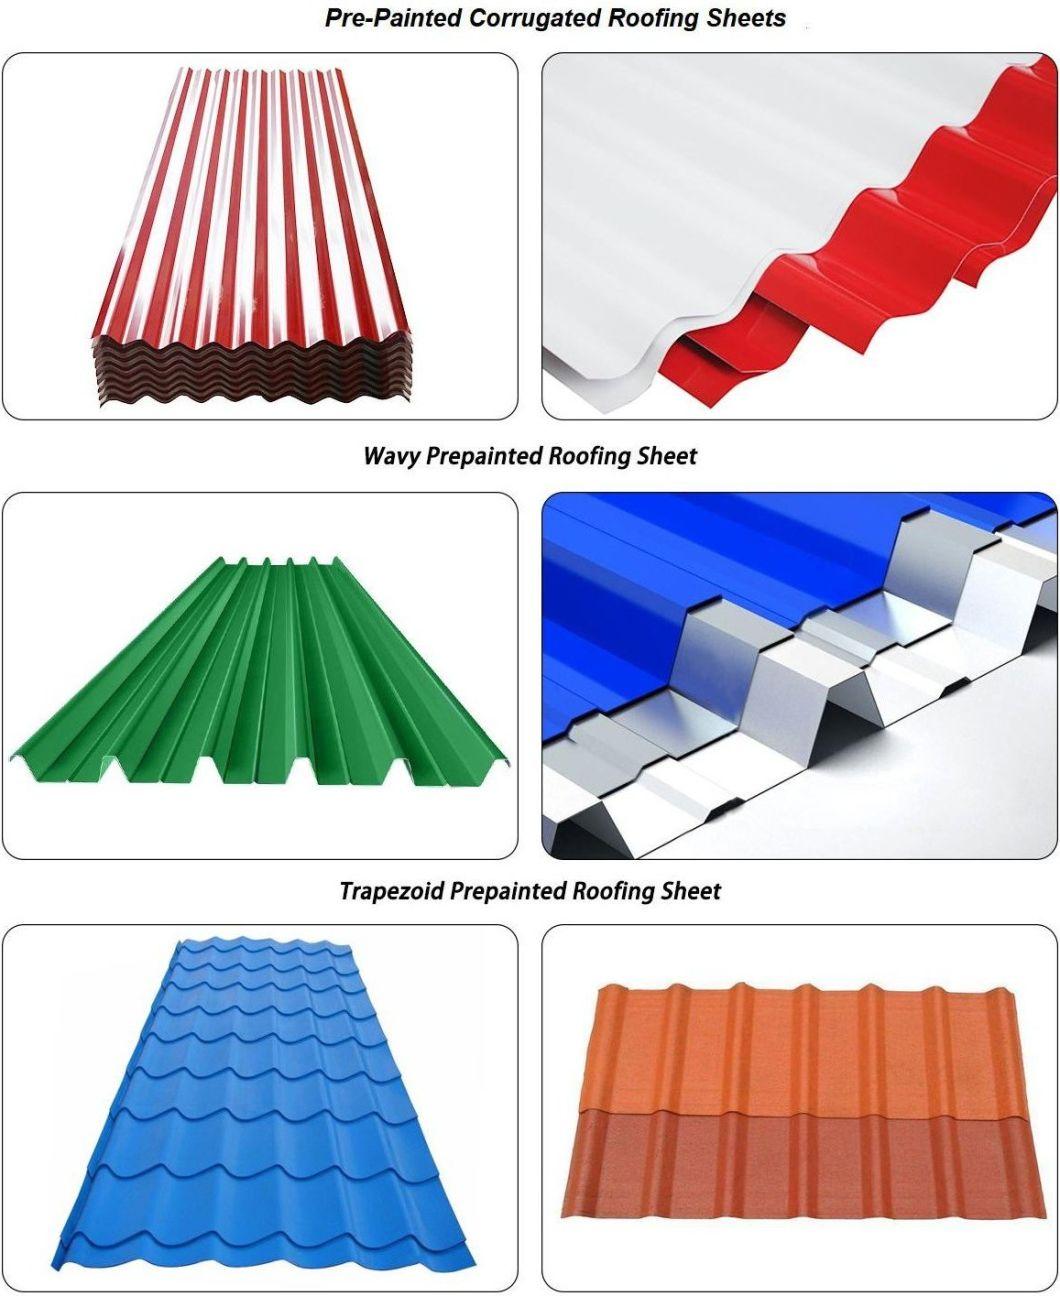 Customized 0.12-2.0mm*600-1250mm JIS Construction Material Sheet Galvanized Steel Color Coated Corrugated Roofing